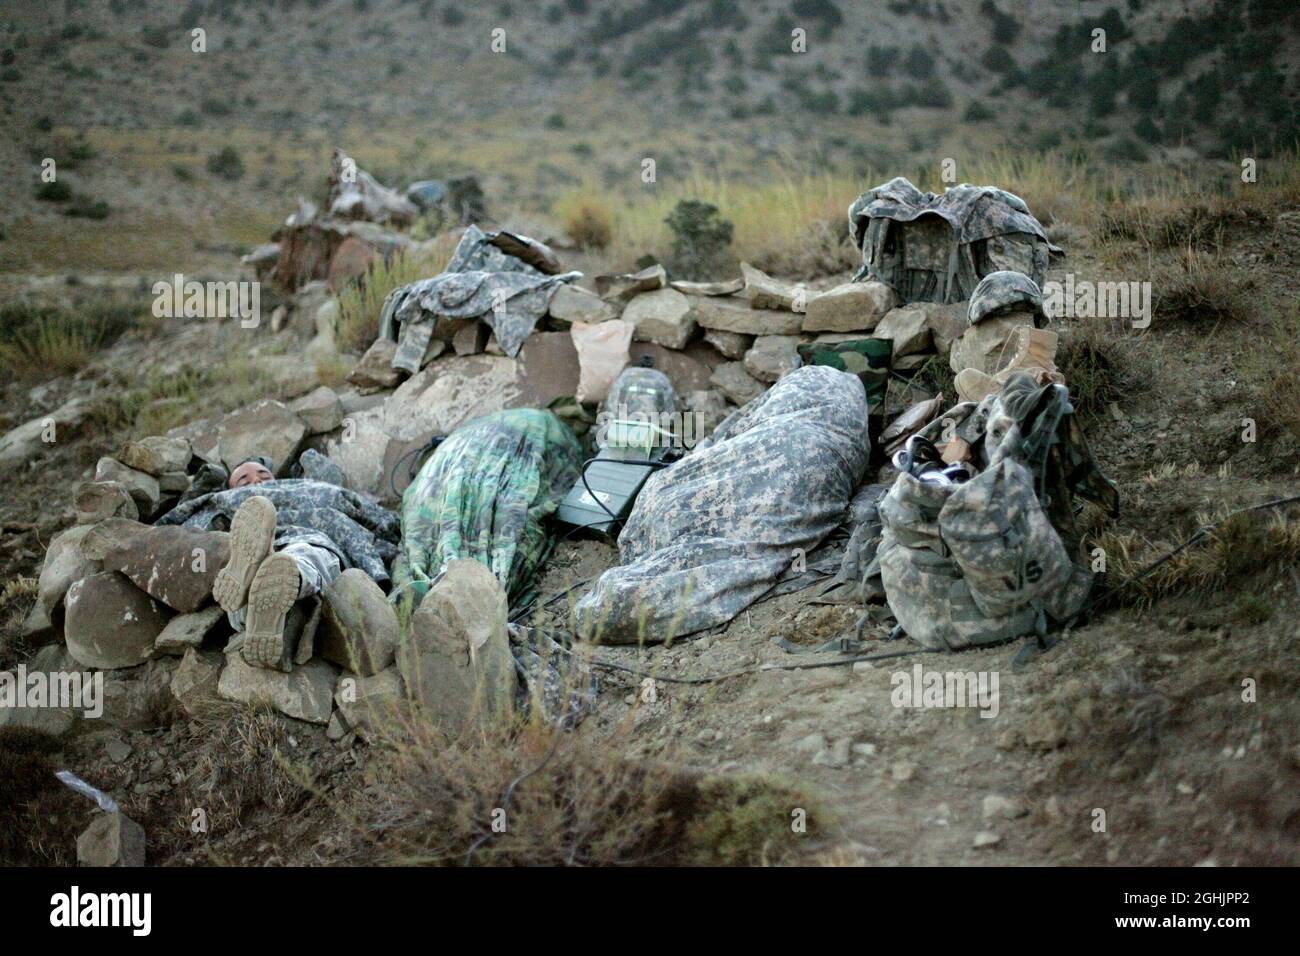 U.S. Army Soldiers sleep in a hasty fighting position on a cold morning after a night patrol in the mountains near Sar Howza, Paktika province, Afghanistan, Sept. 4. The Soldiers are deployed with Bulldog Troop, 1st Squadron, 40th Cavalry Regiment. Stock Photo